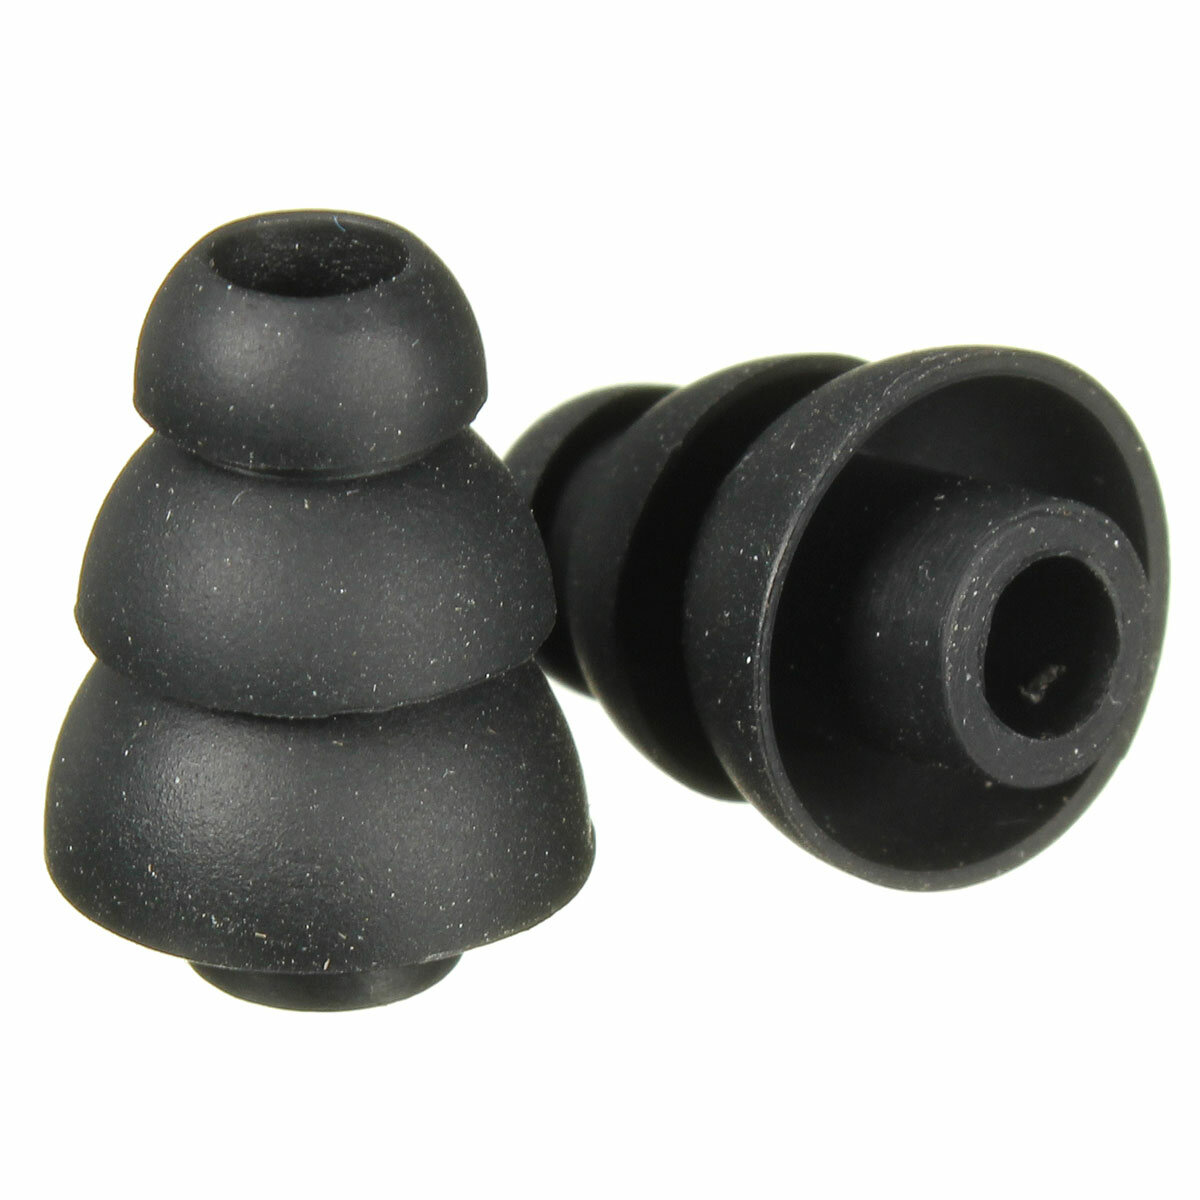 Small 2pcs Three Layer Silicone In-Ear Earphone Covers Cap Replacement Earbud Bud Tips Earbuds Eartips Earplug Ear Pads COD